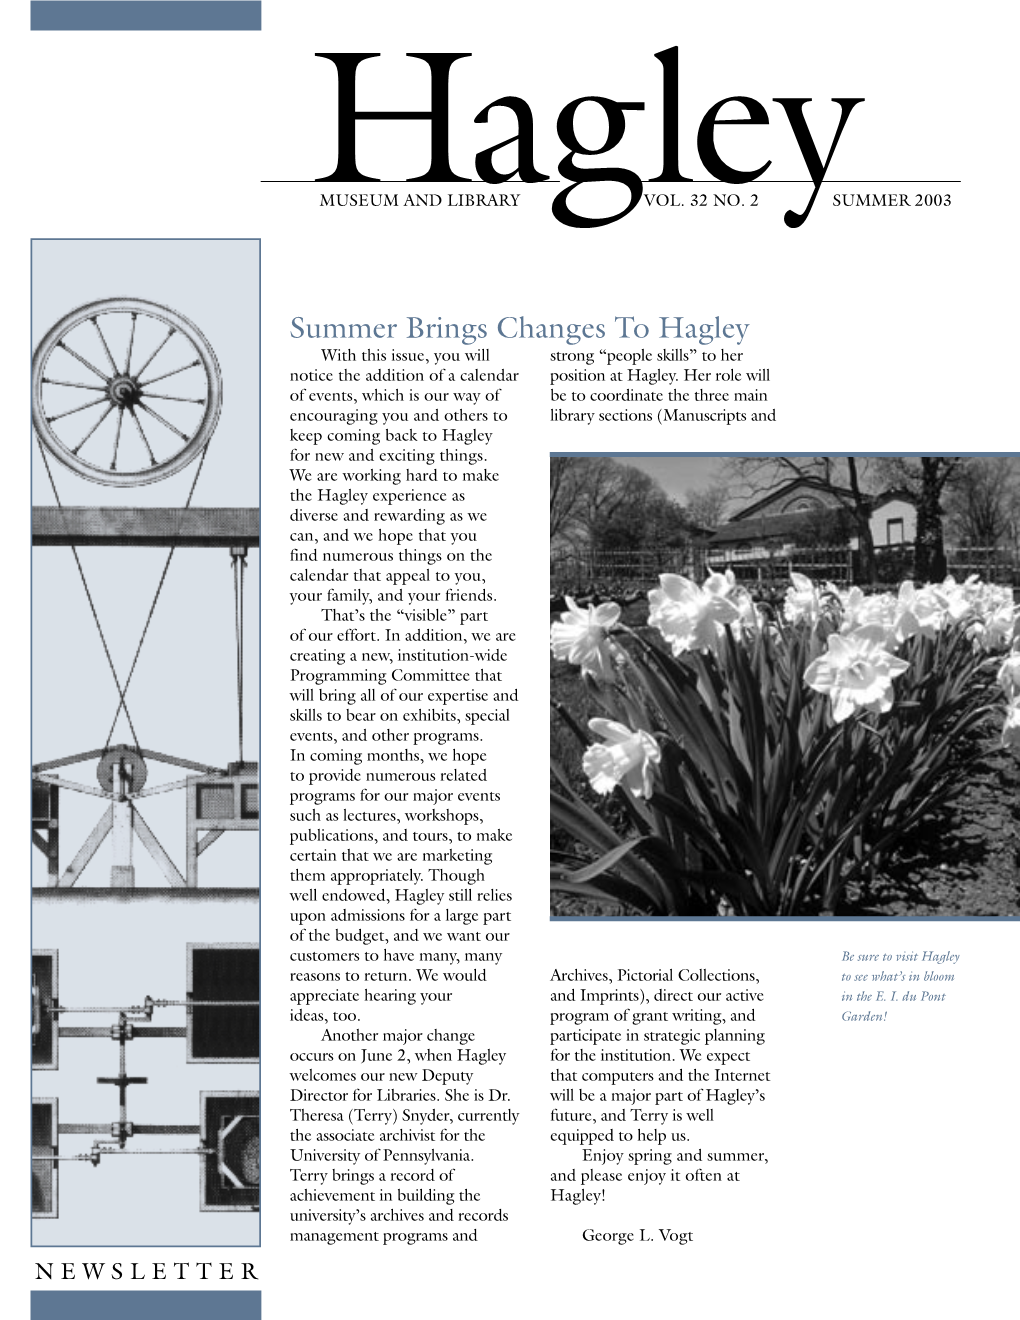 Summer Brings Changes to Hagley with This Issue, You Will Strong “People Skills” to Her Notice the Addition of a Calendar Position at Hagley